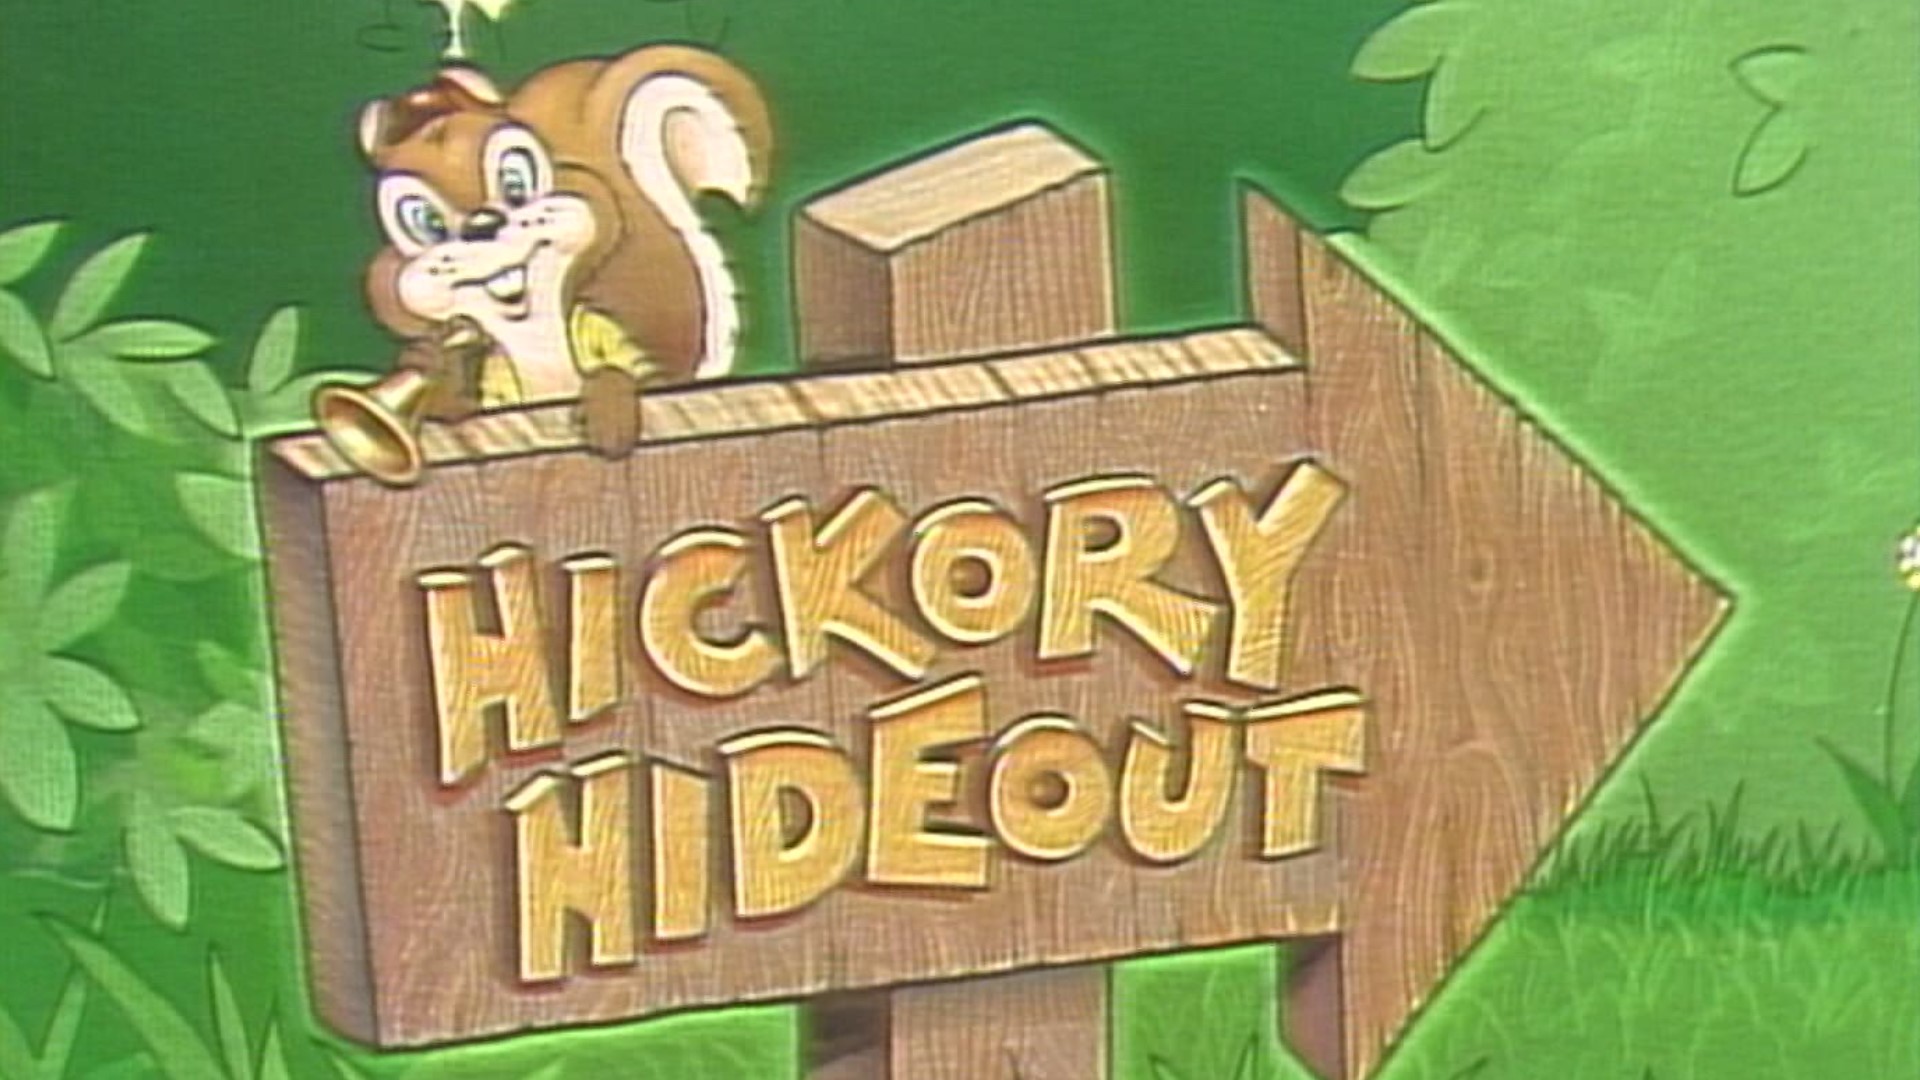 Take a peek back at the iconic 'Hickory Hideout' theme song to the popular children's show.